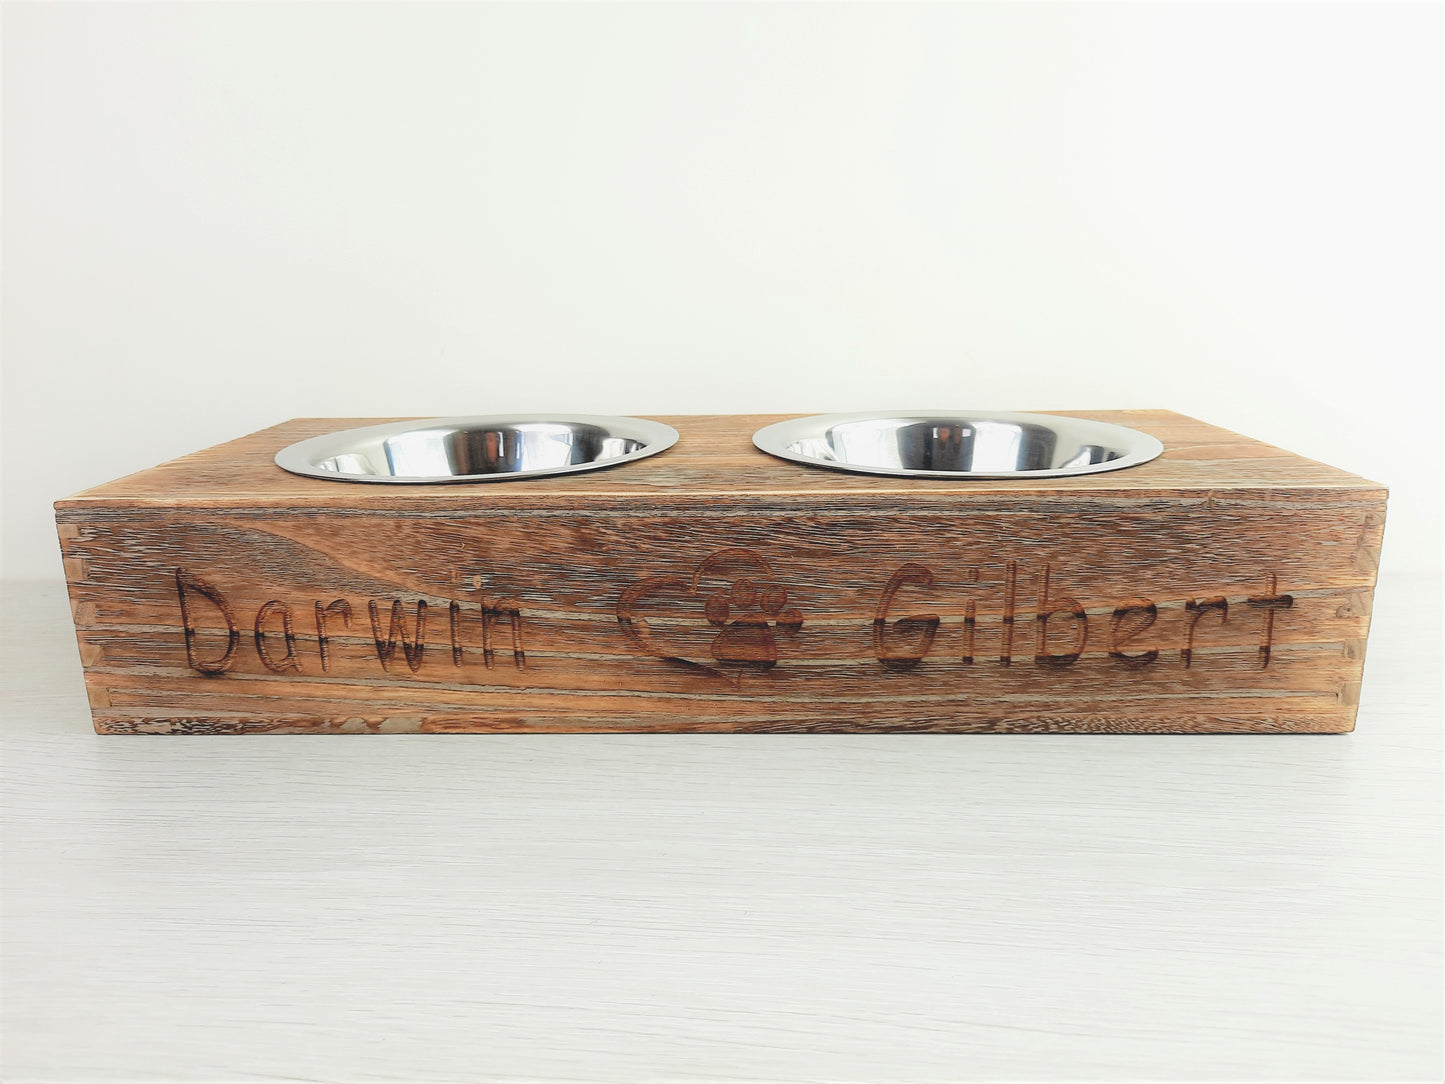 Personalised Pet Bowl Feeder Bamboo Wood with engraved 2 pet names that says "Darwin" Paw with heart icon " Gilbert".